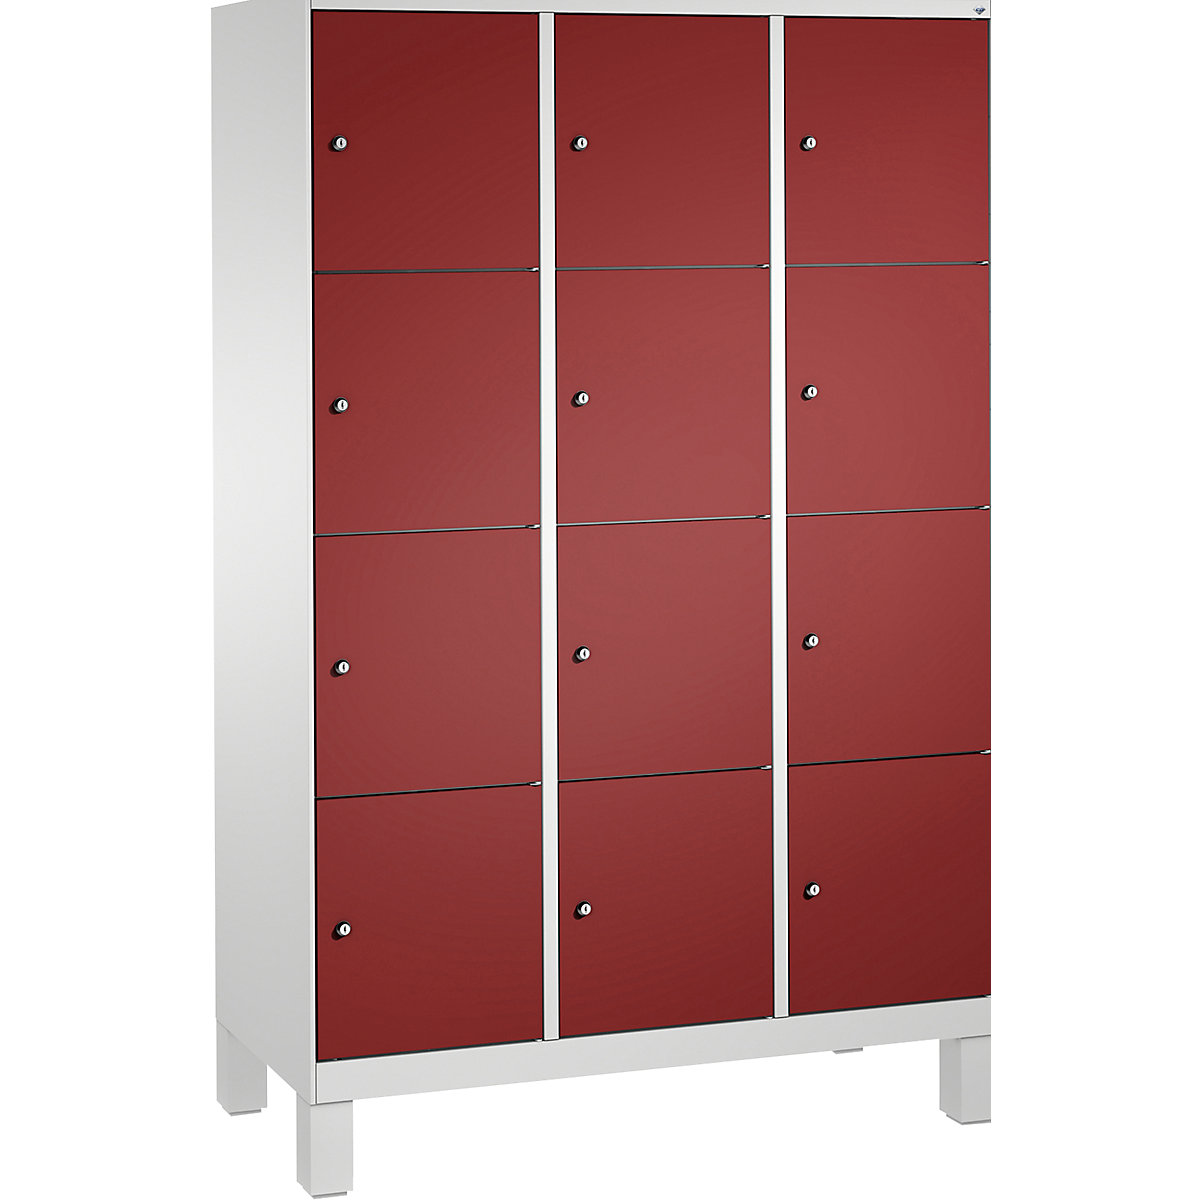 EVOLO locker unit, with feet – C+P, 3 compartments, 4 shelf compartments each, compartment width 400 mm, light grey / ruby red-10